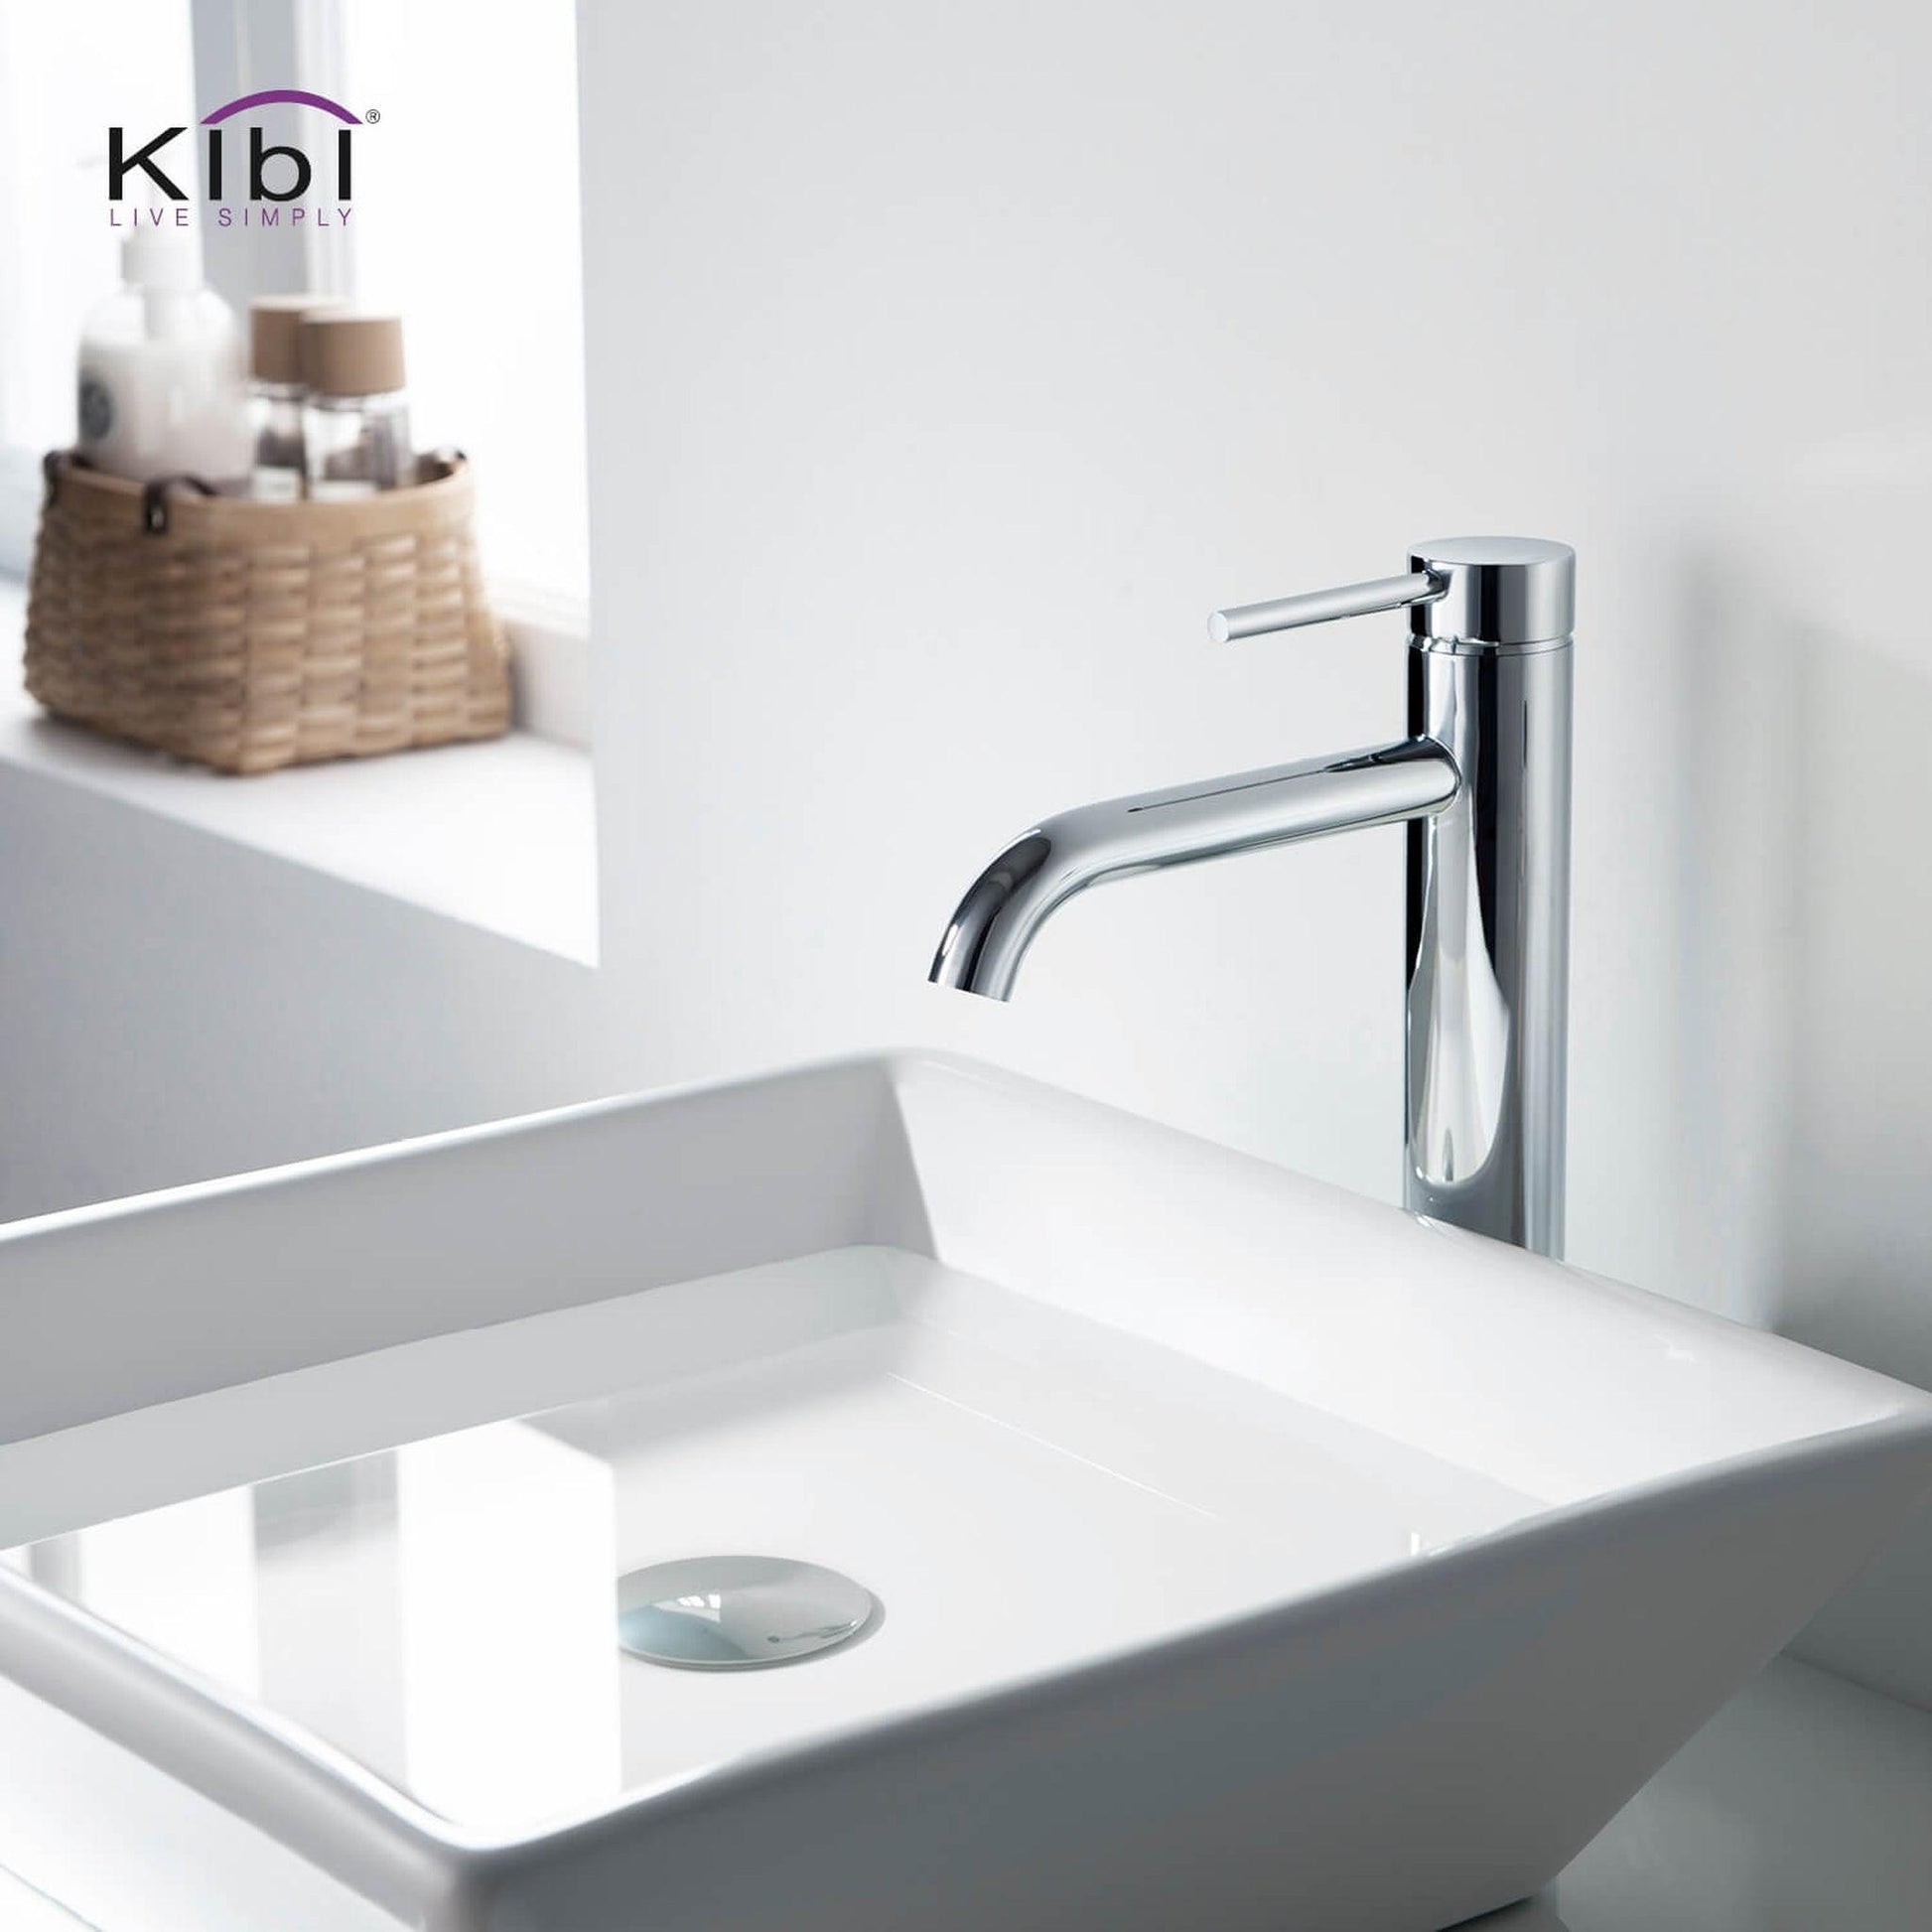 KIBI Circular Single Handle Chrome Solid Brass Bathroom Vessel Sink Faucet With Pop-Up Drain Stopper Small Cover Without Overflow